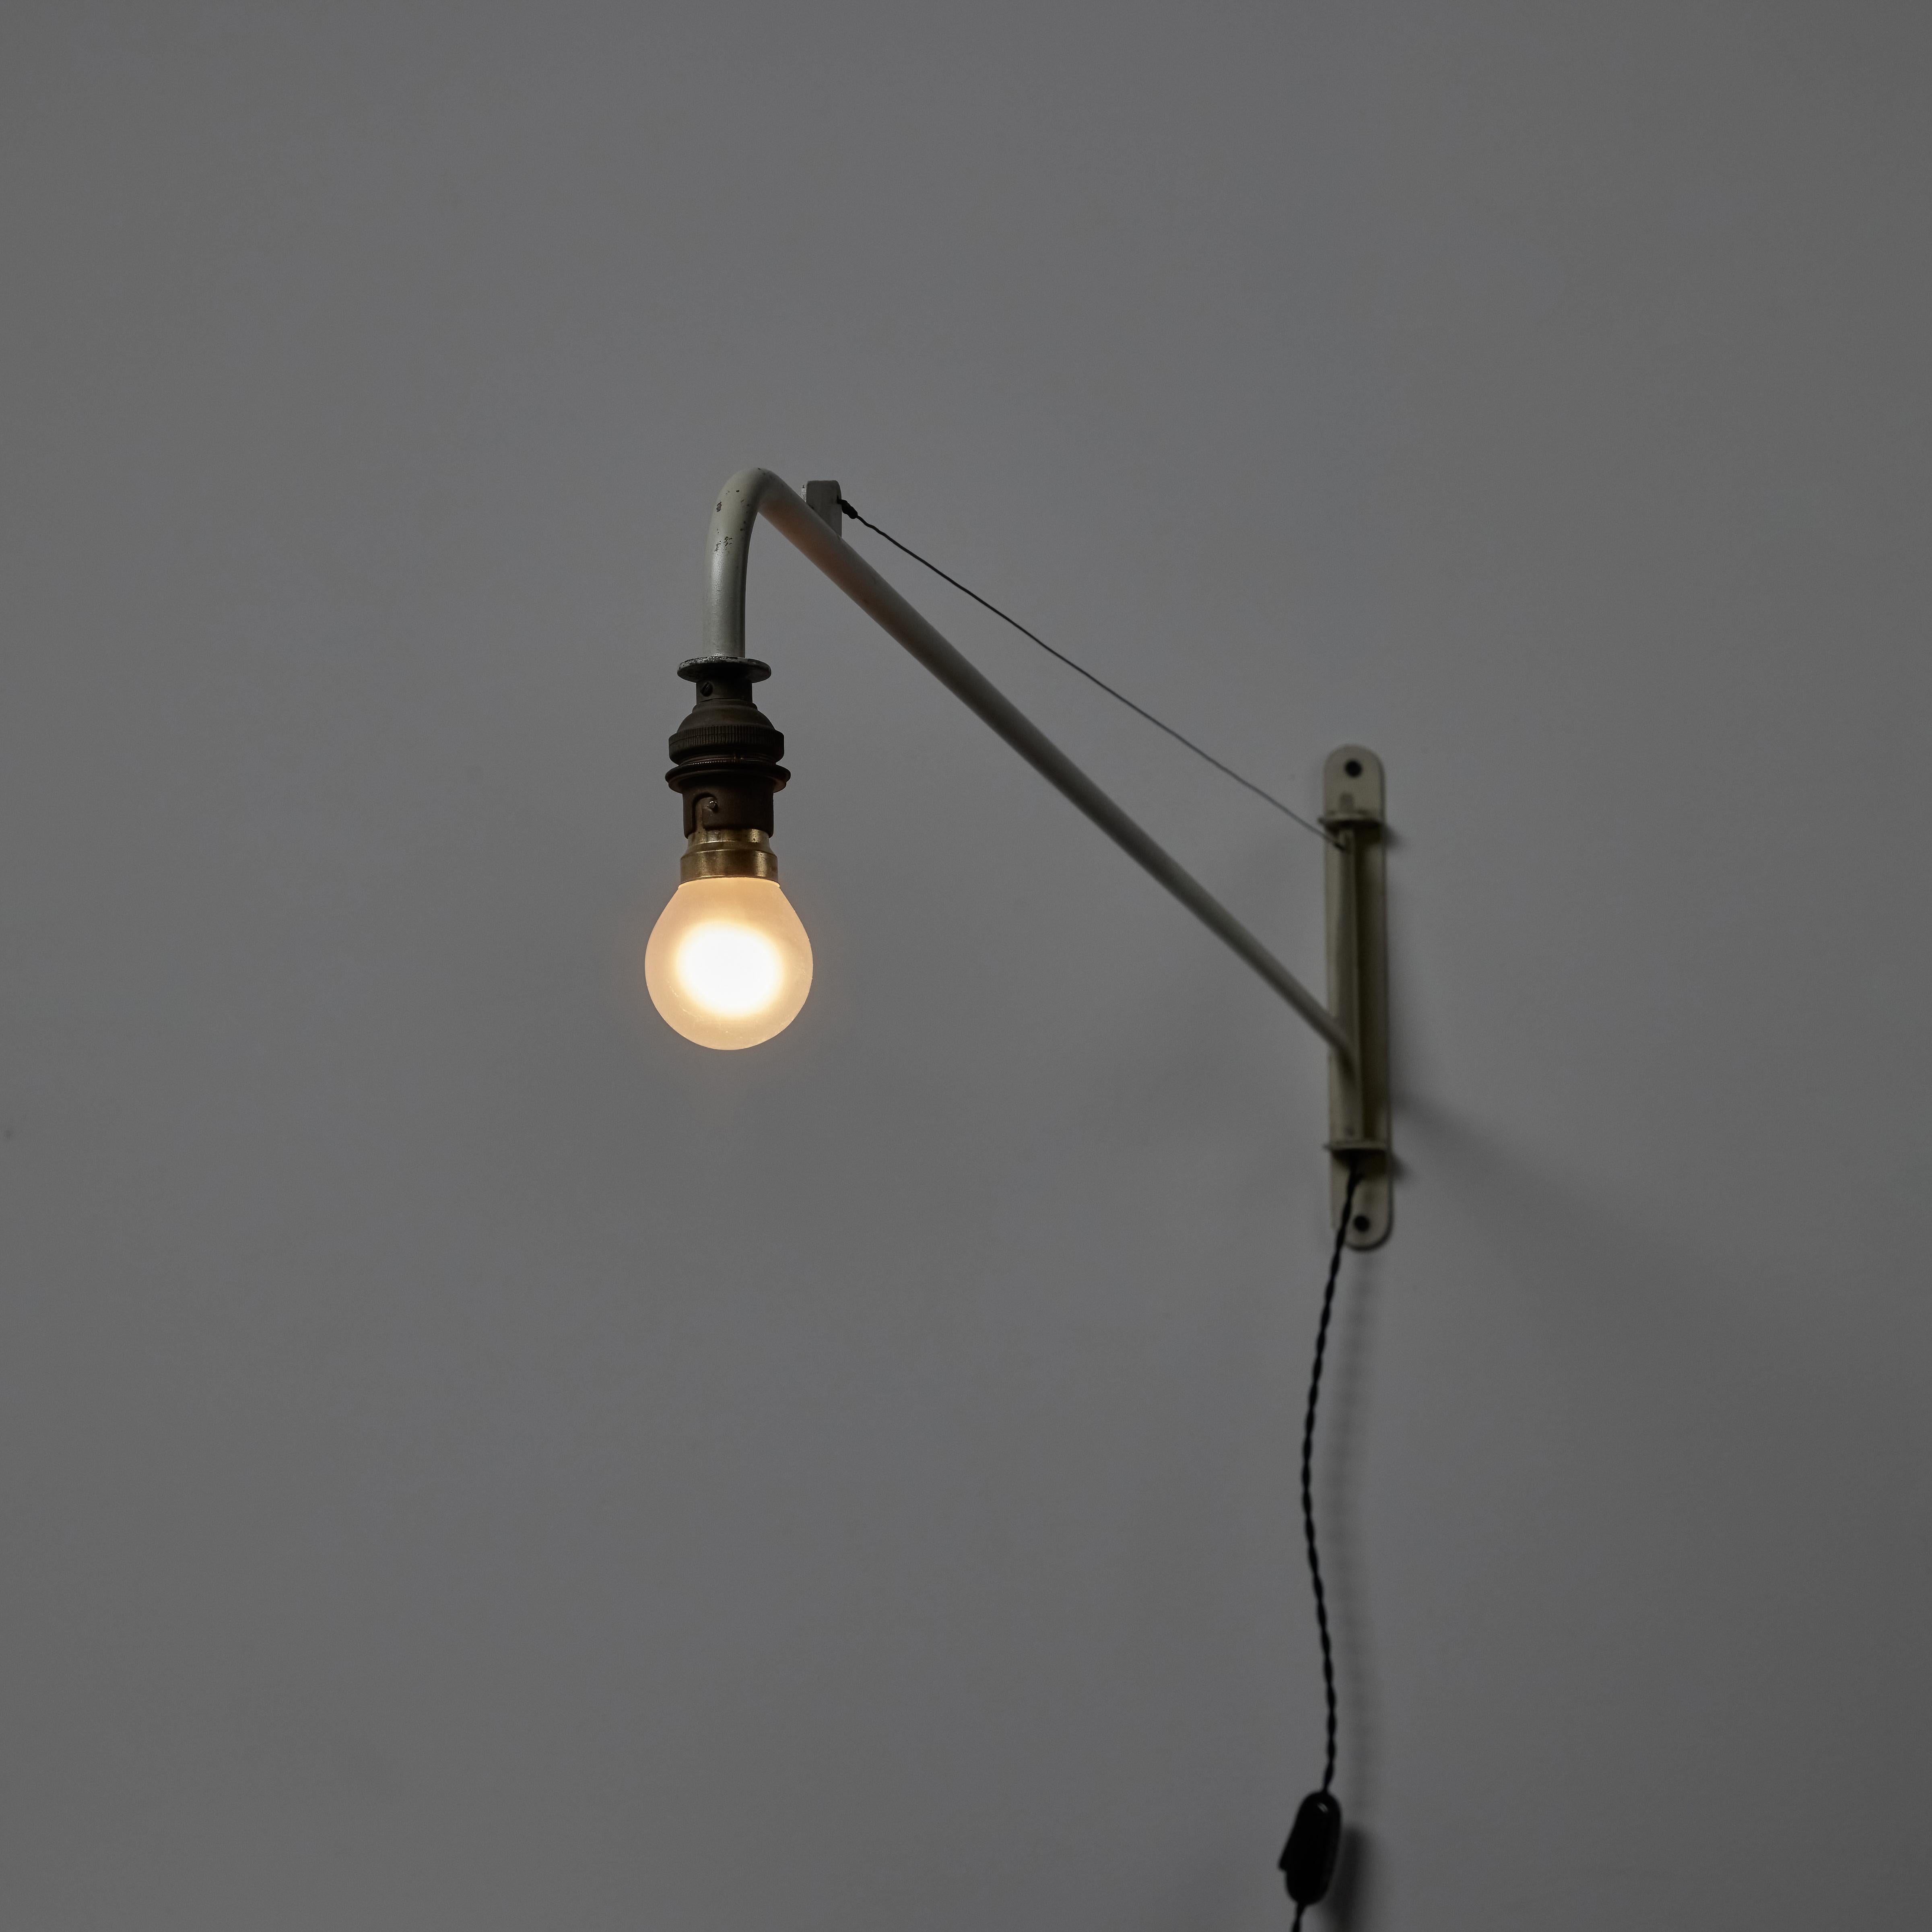 Mid-20th Century 'Potence D'eclairage' Swing Jib Wall Light by Jean Prouve For Sale